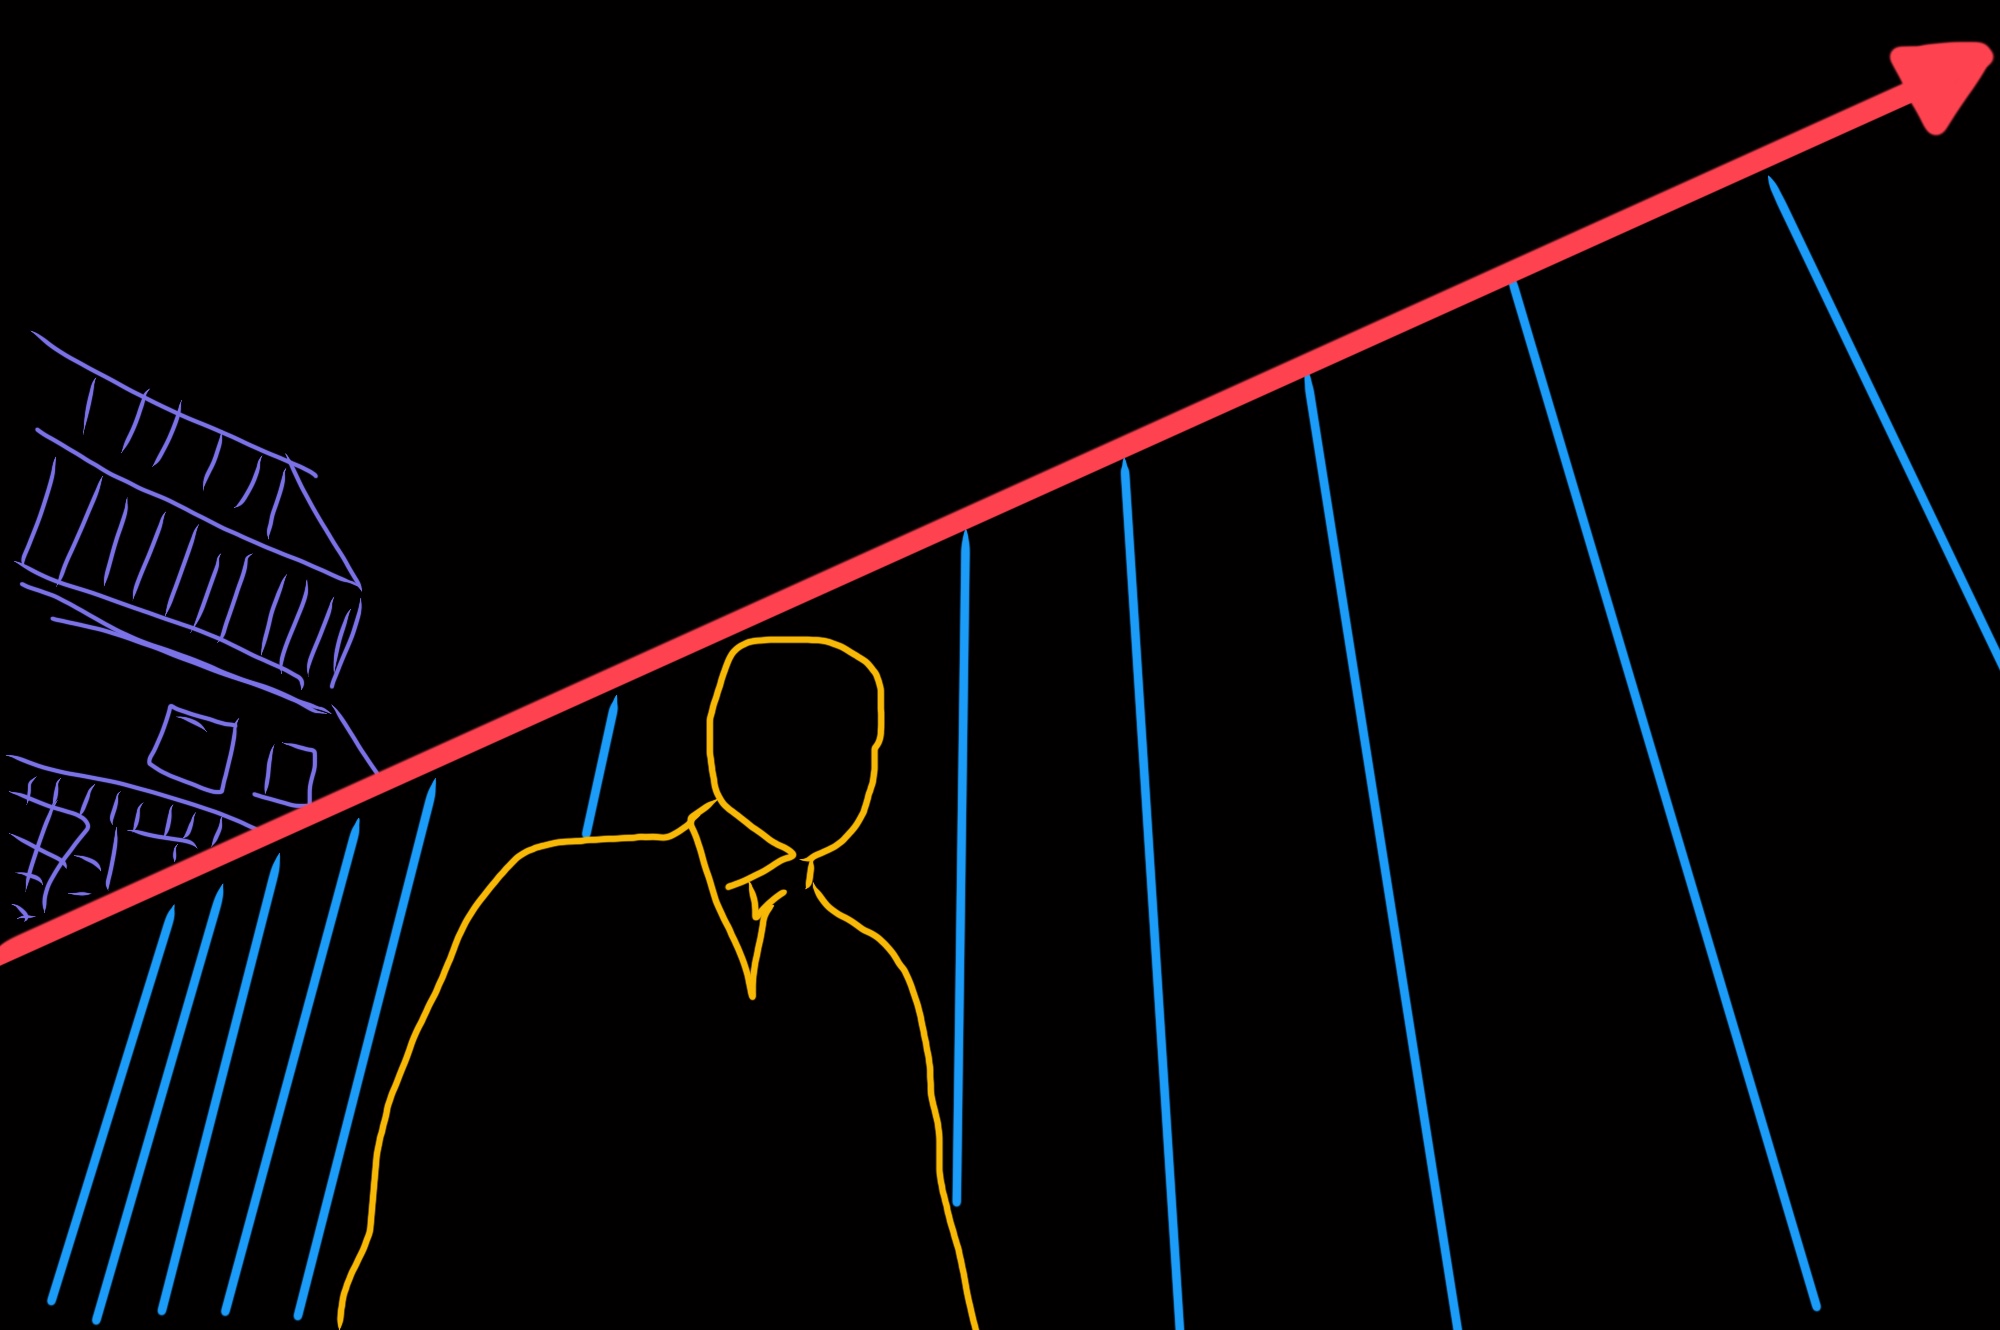 Abstract image, outlining the man (yellow), the background (blue) and the leading line (red)